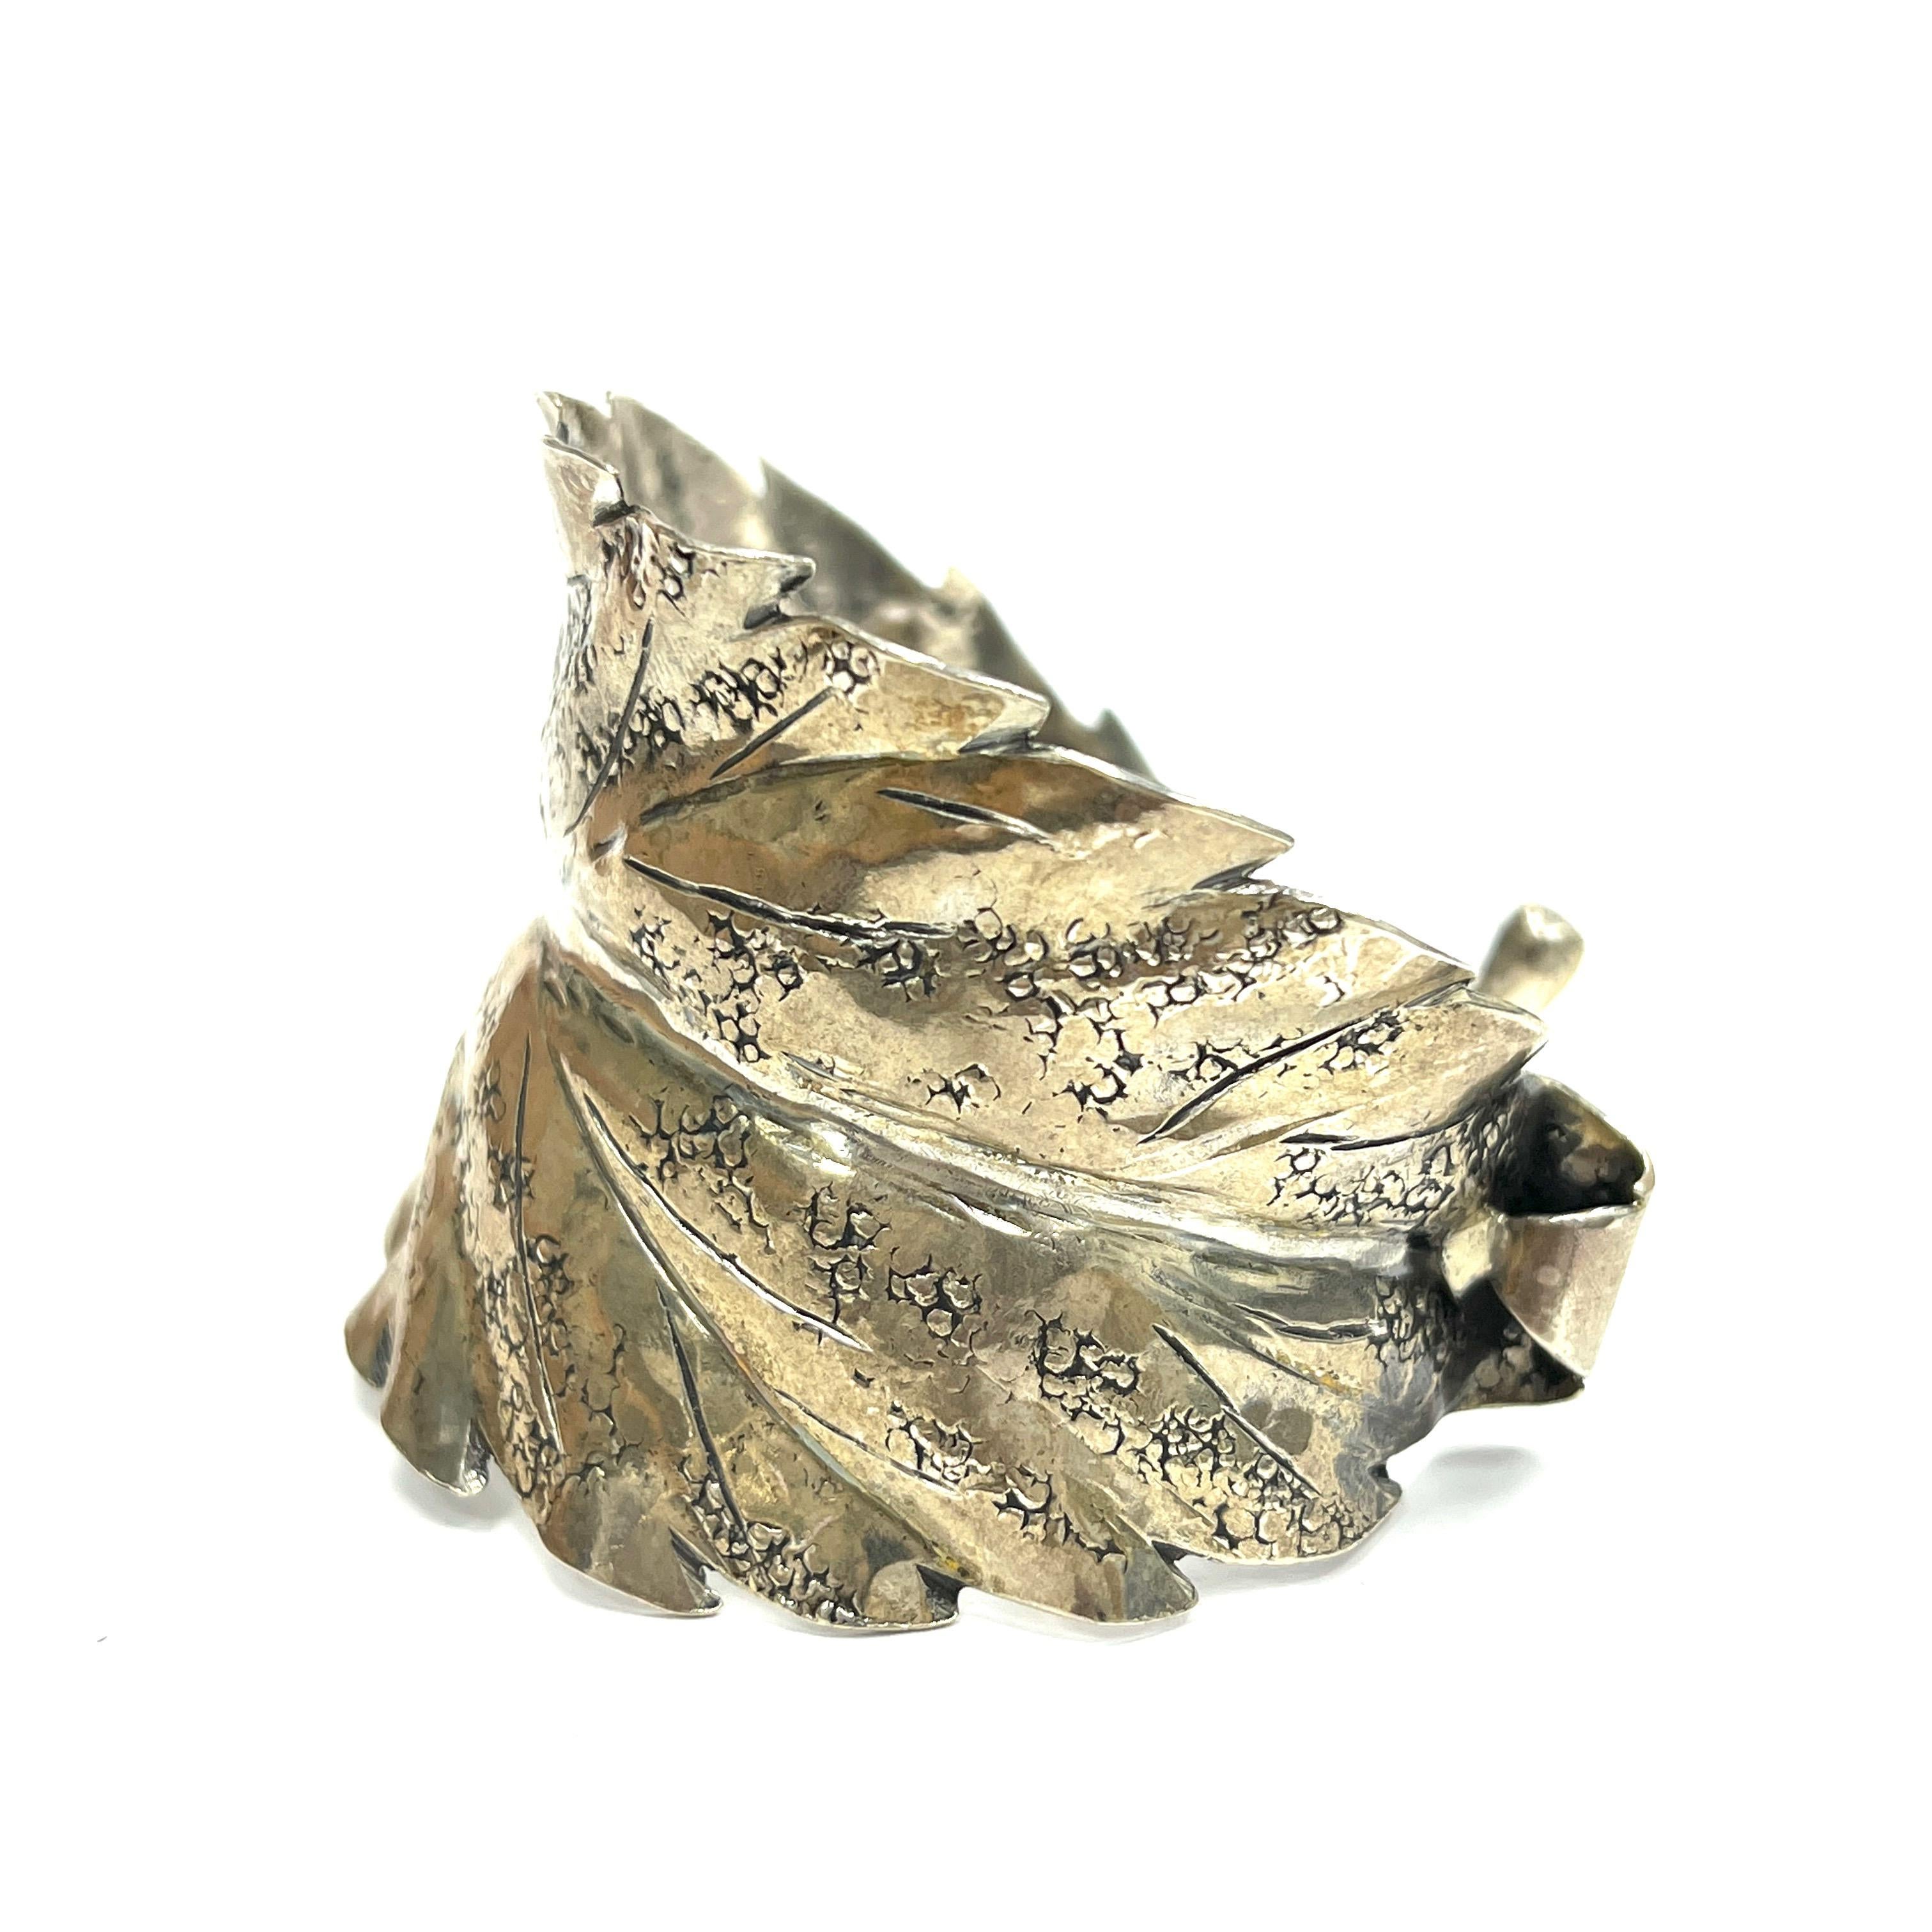 Buccellati Mario Leaf Sterling Silver Cuff Bracelet, Italian

Medlar leaf design made out of sterling silver; marked Buccellati, Italy, 925, Sterling

Size: width 2 inches; inner circumference 6.5 inches
Total weight: 41.0 grams